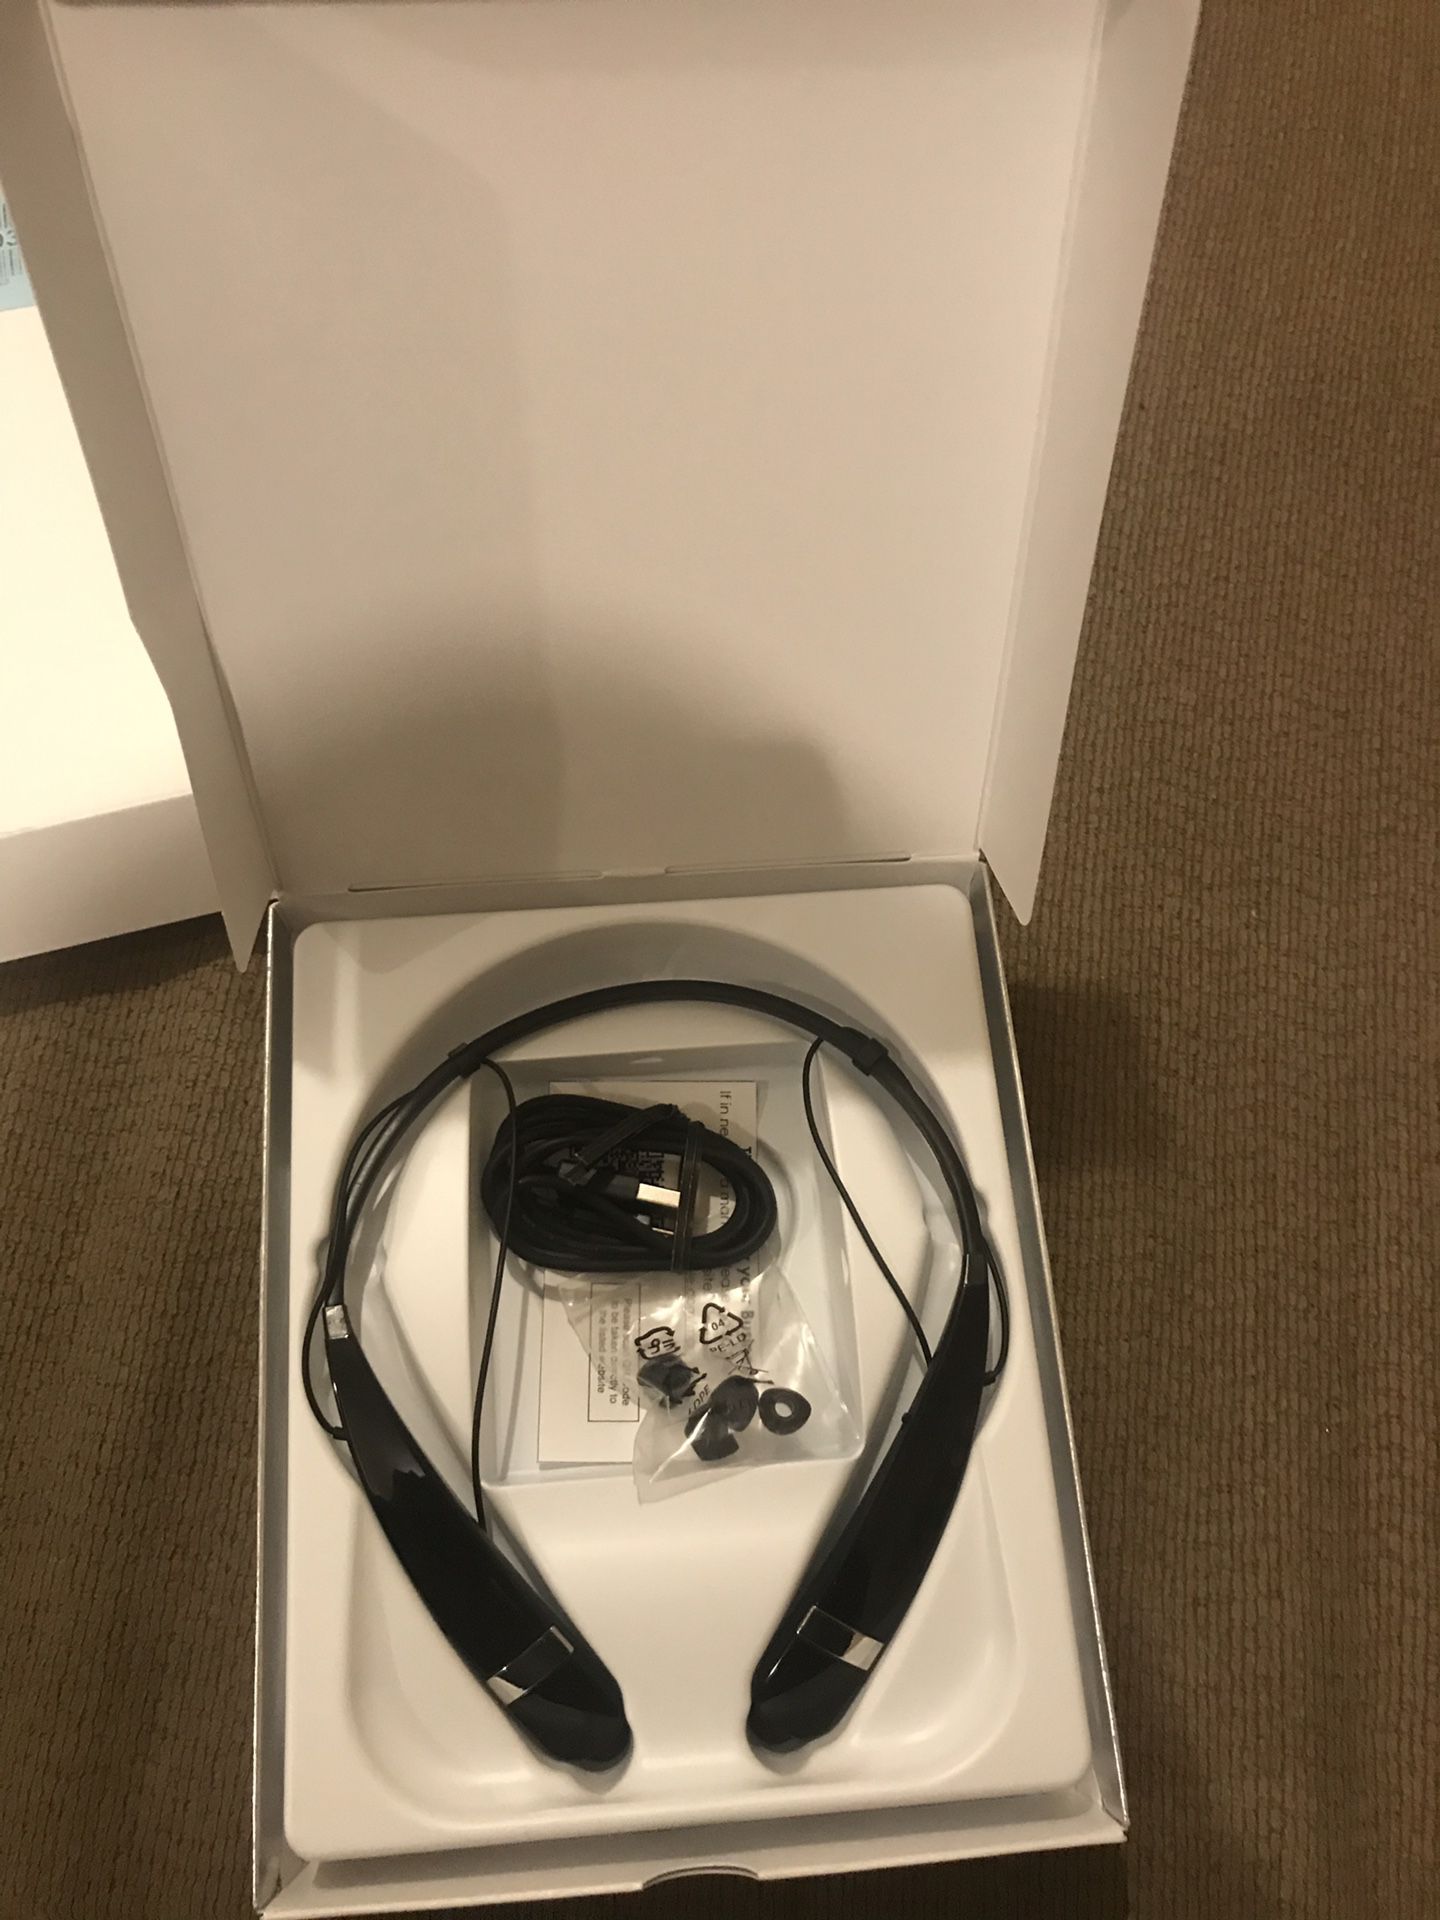 Original LG HBS 760 headphones, iPhones and Android compact able.